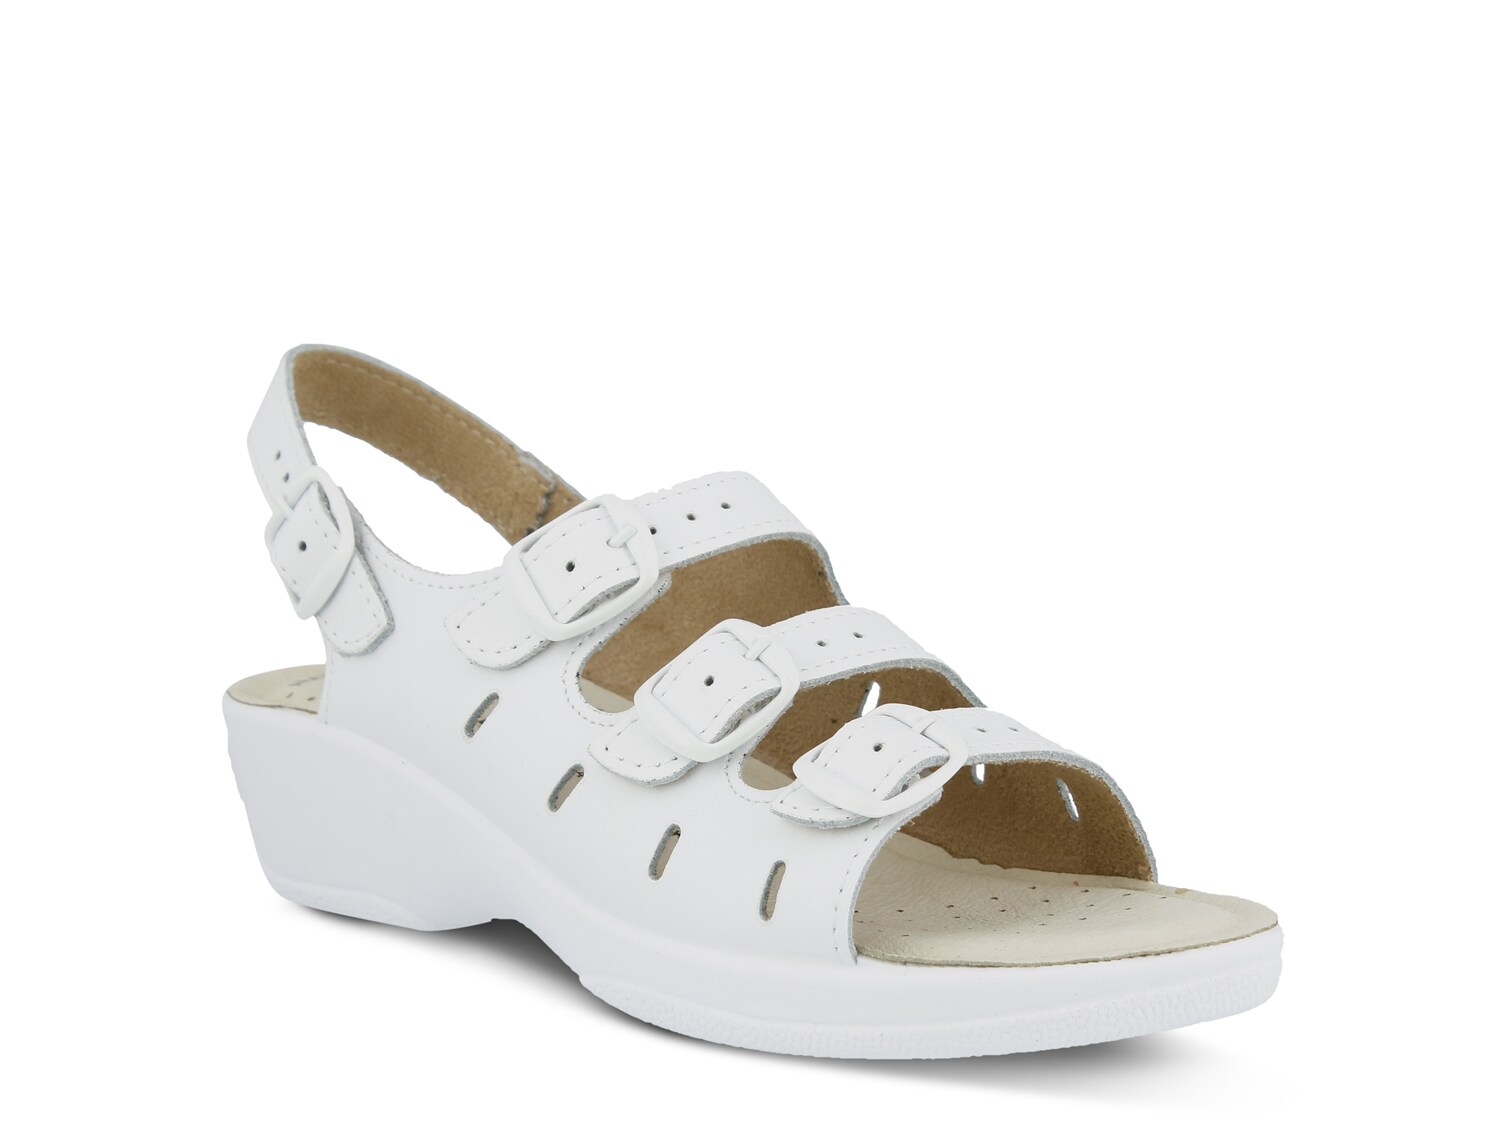 Flexus by Spring Step Willa Wedge Sandal - Free Shipping | DSW